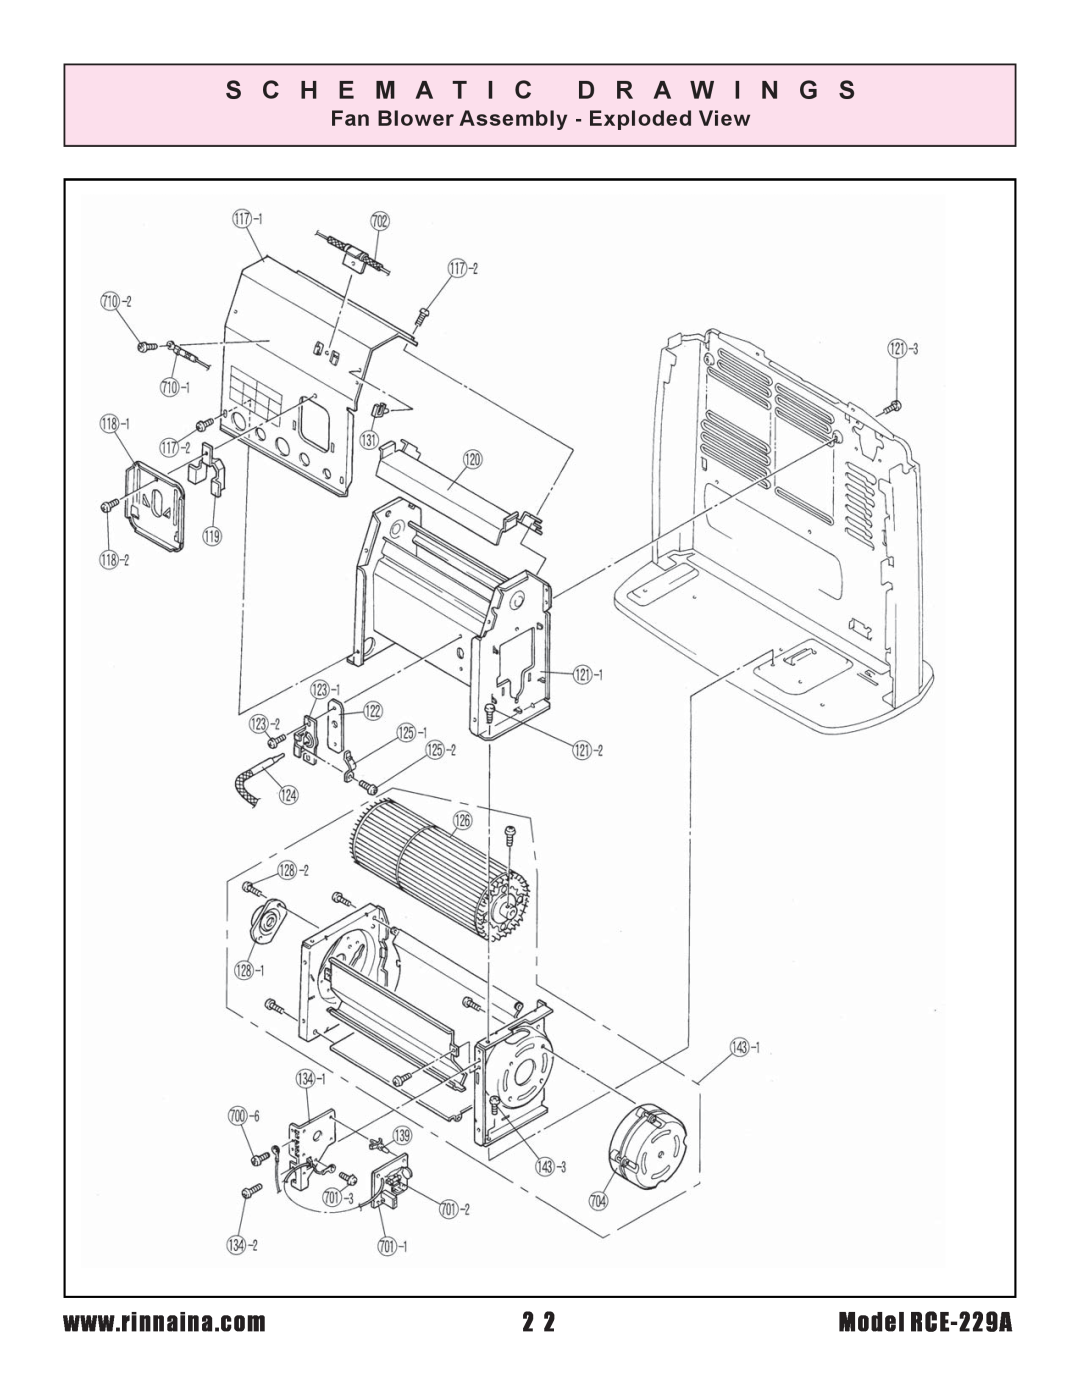 Rinnai installation instructions S C H E M A T I C D R A W I N G S, Model RCE-229A, Fan Blower Assembly - Exploded View 